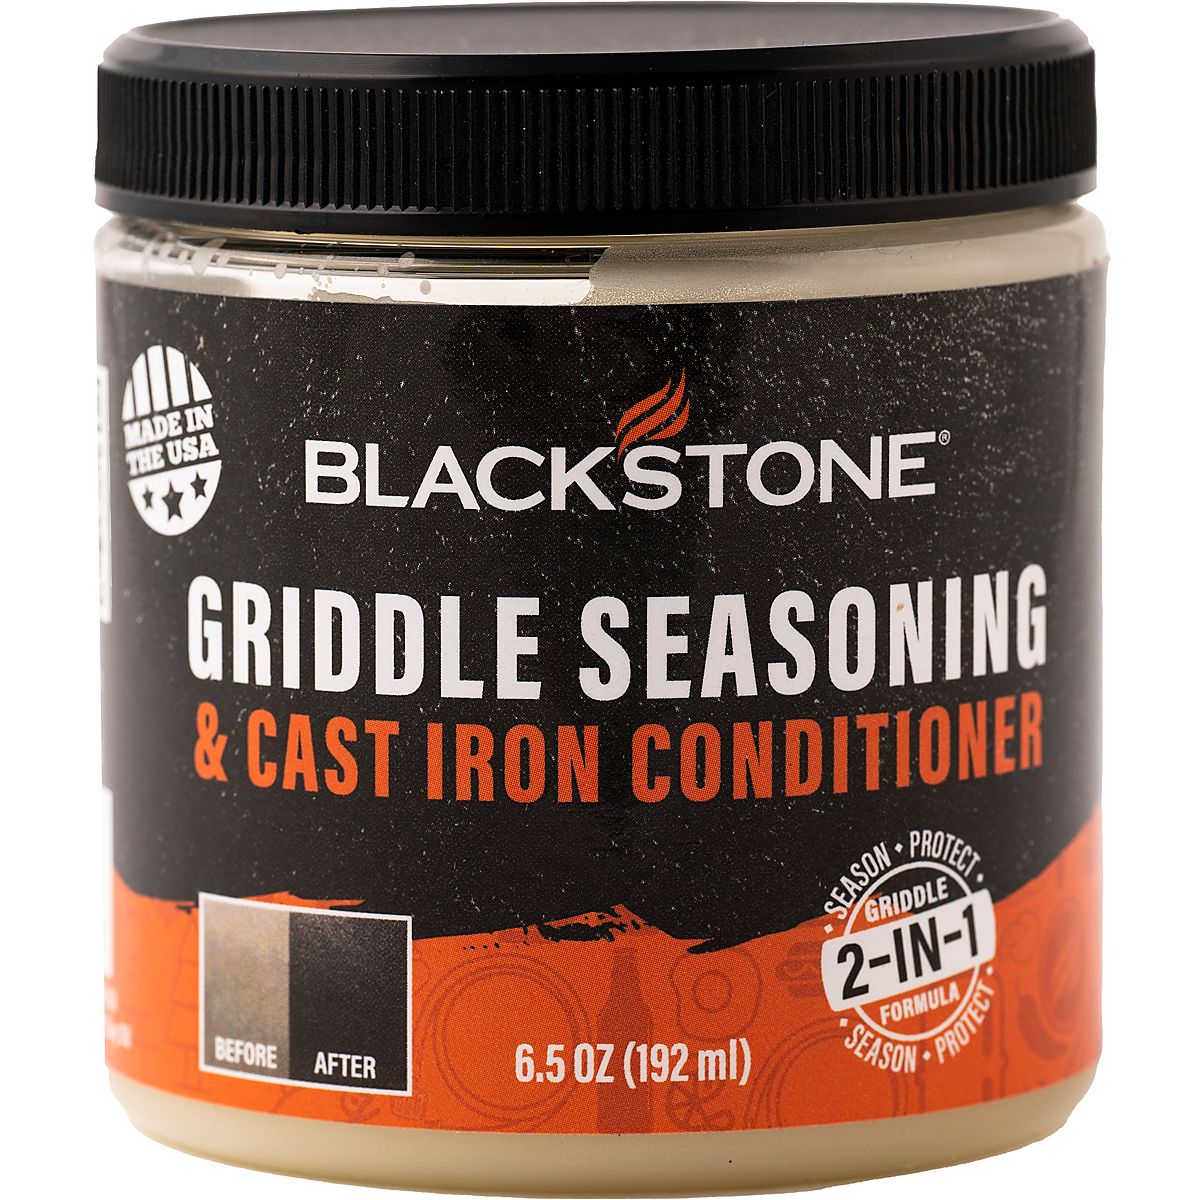 5 Must-Try Sauces & Seasonings for Blackstone Griddle – re·dact